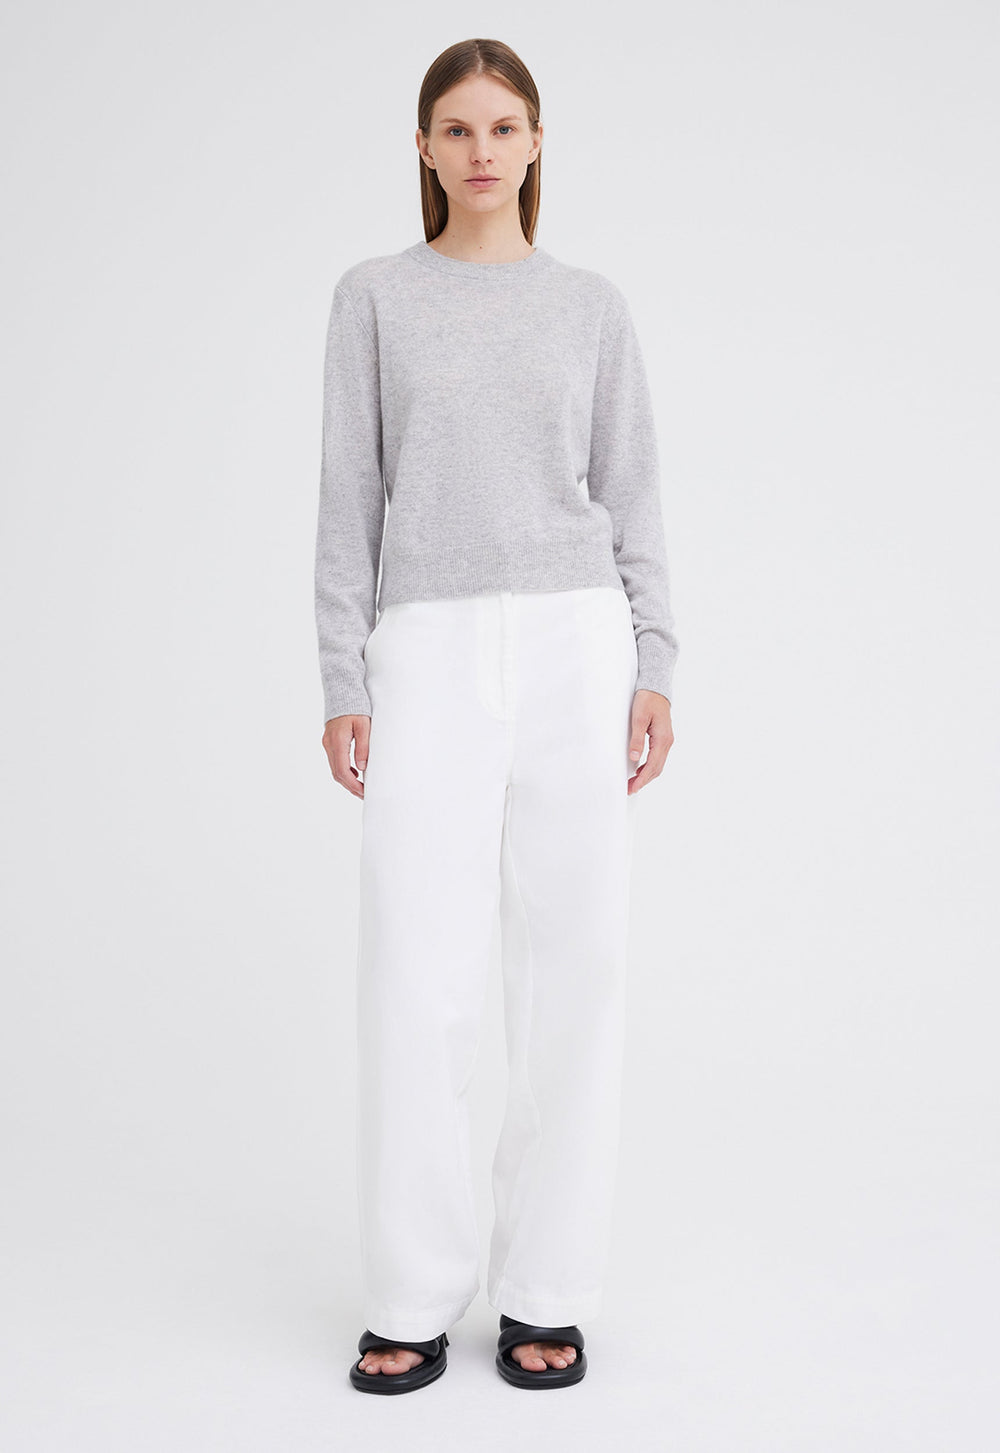 Jac+Jack Peter Cashmere Sweater - Pale Grey Marle